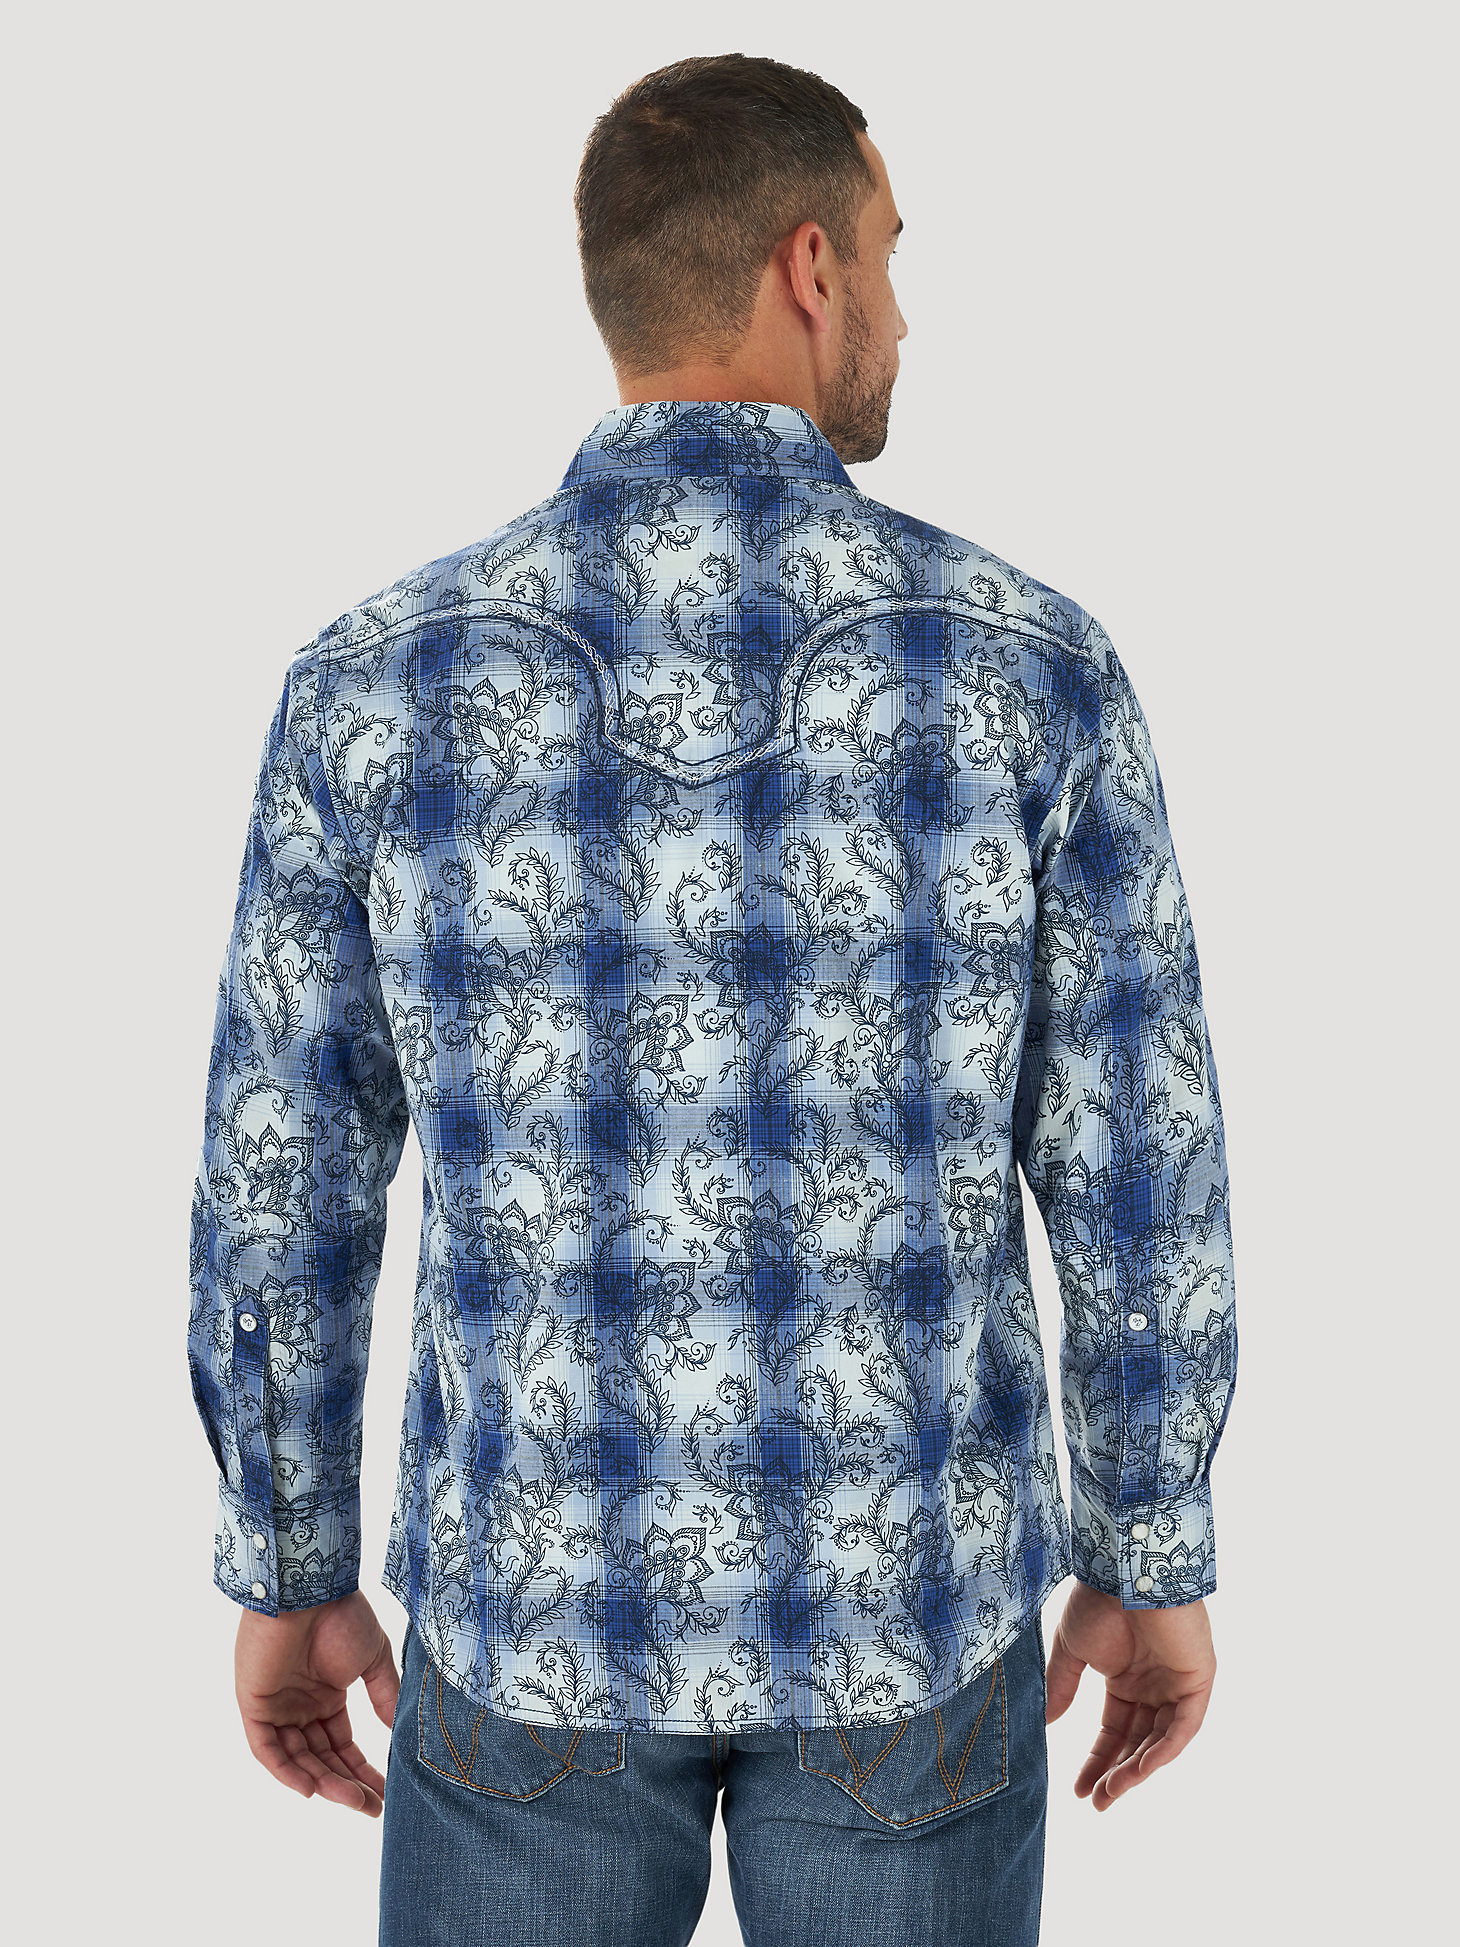 Men's Rock 47 by Wrangler Long Sleeve Vintage Embroidered Yoke Print Snap Shirt in Blue Paisley alternative view 1